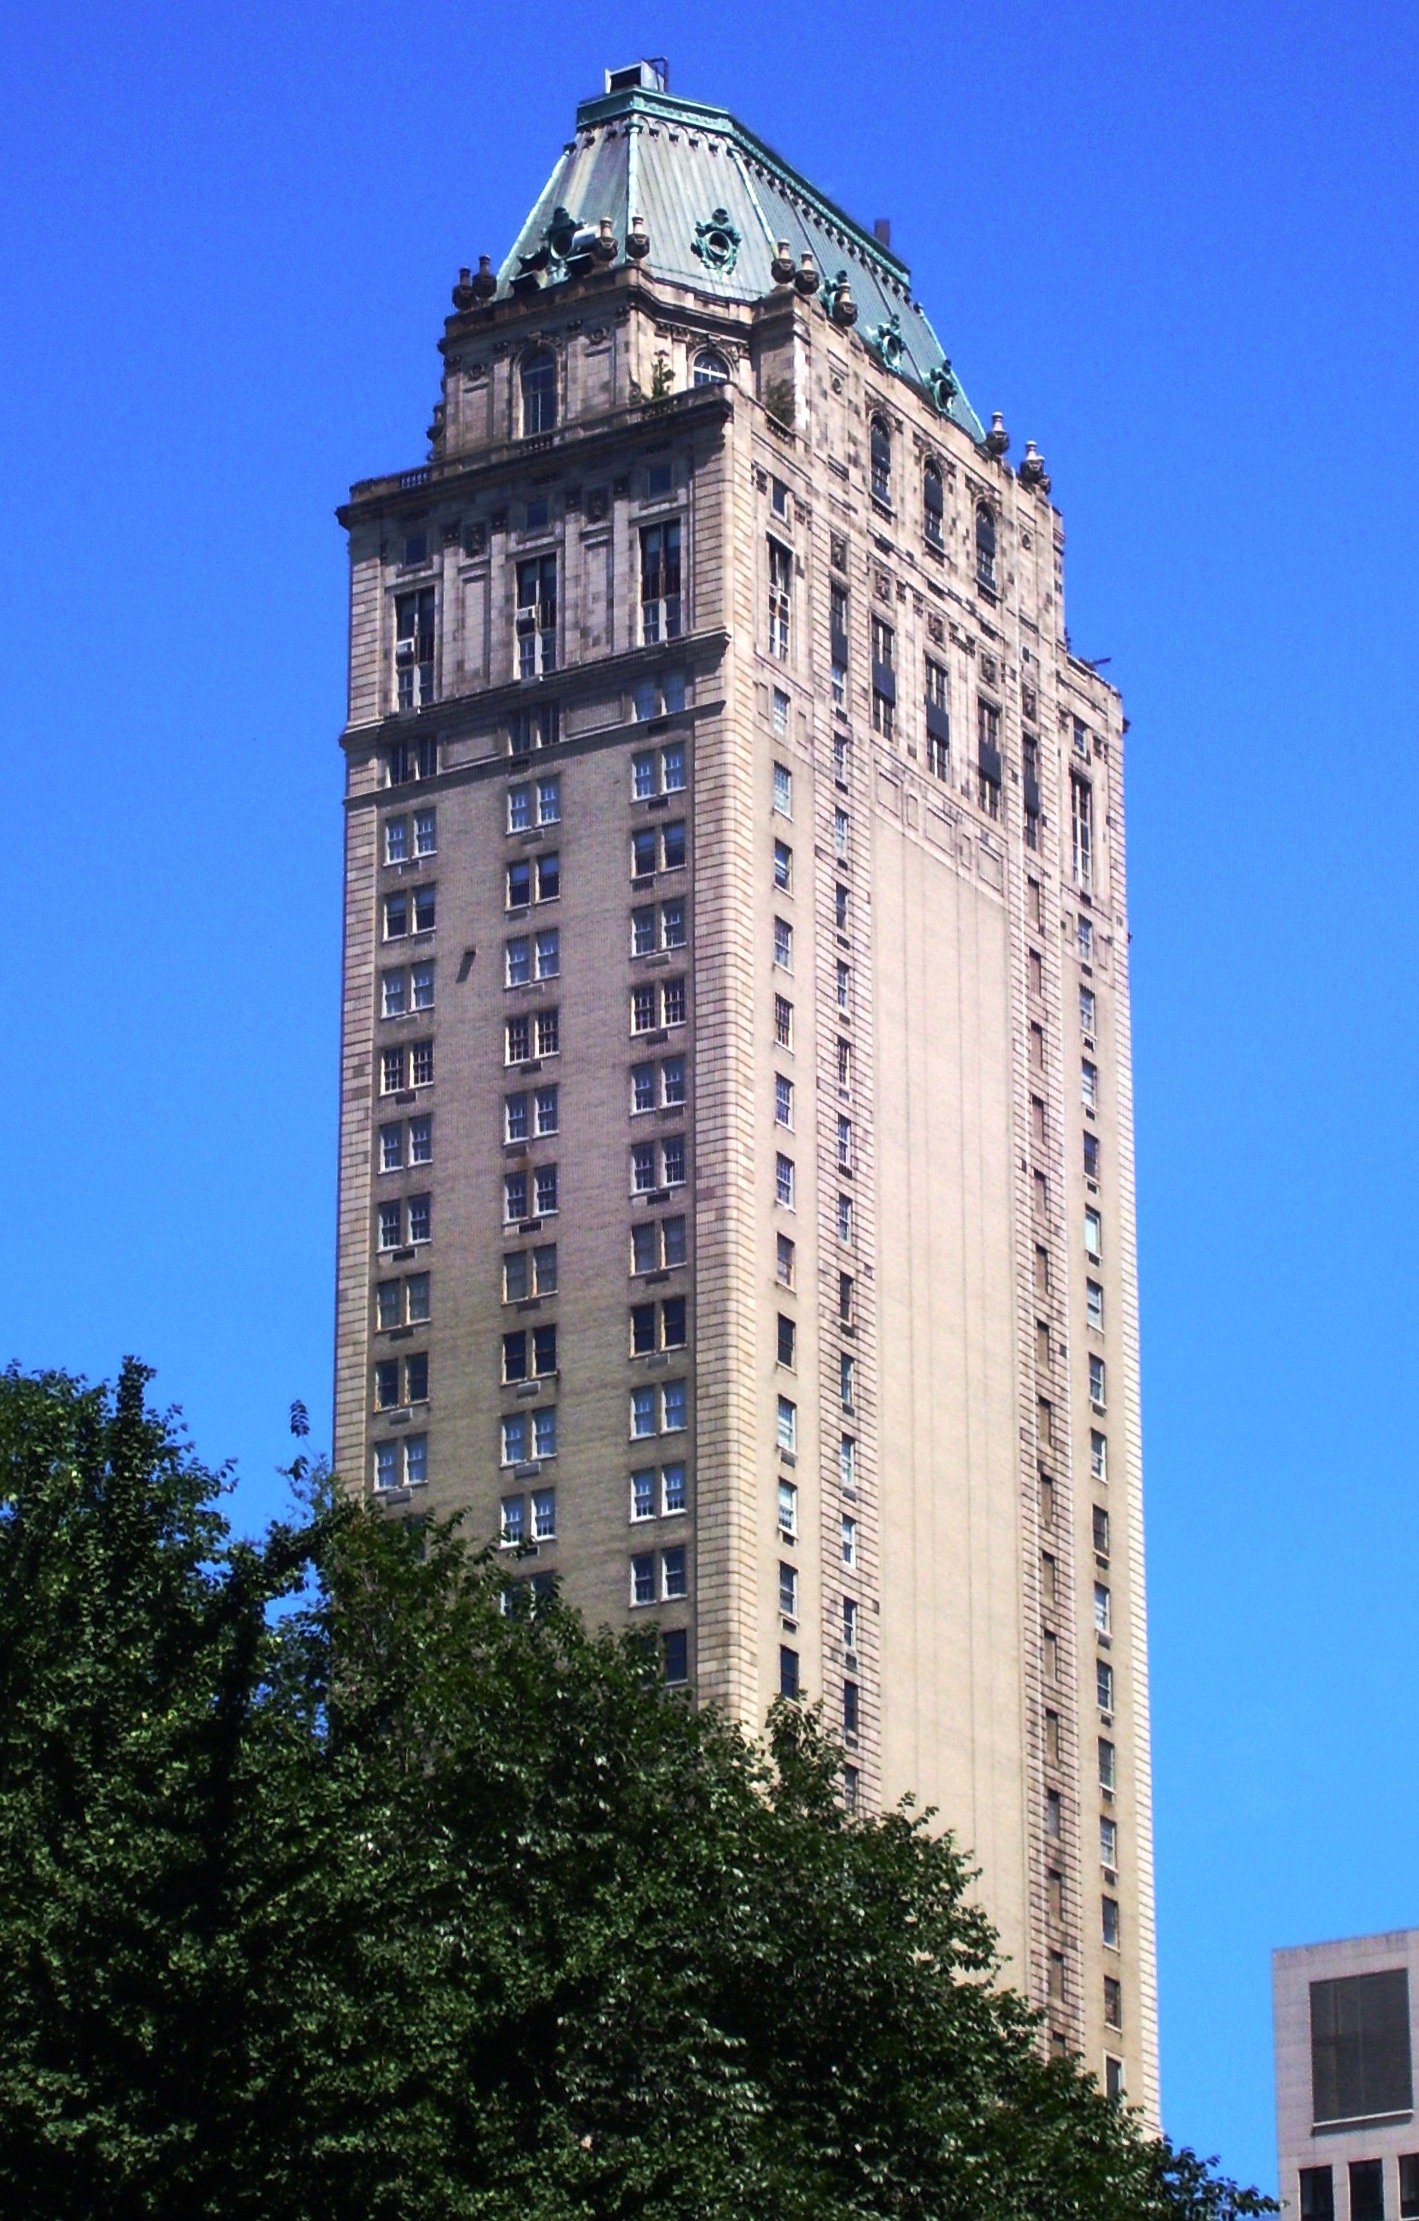 The Pierre Hotel